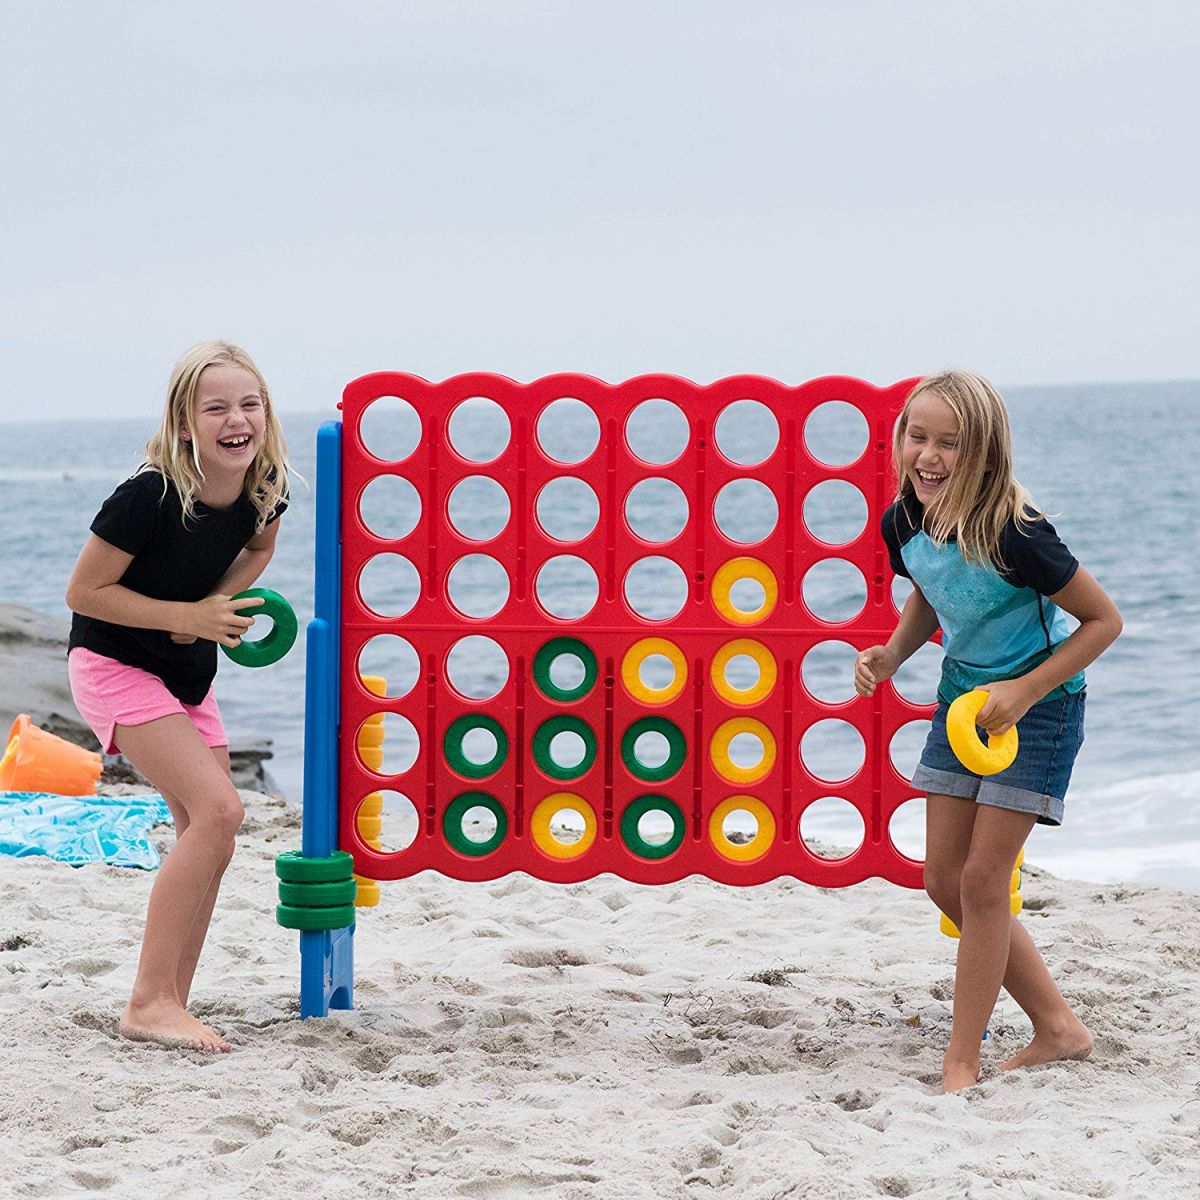 Girls playing giant connect 4 game at the beach